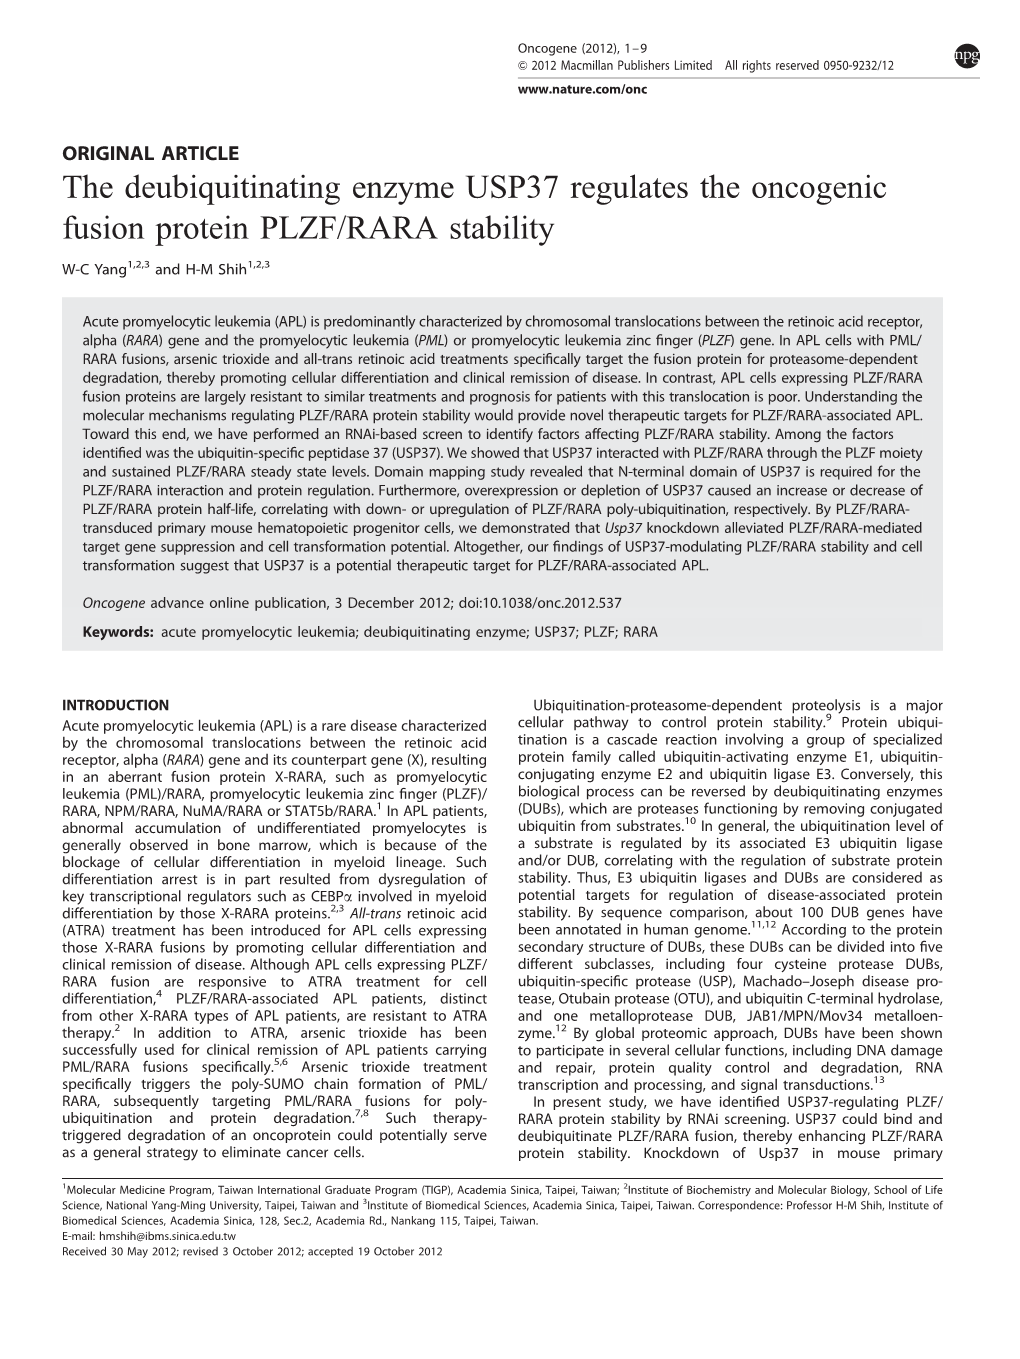 The Deubiquitinating Enzyme USP37 Regulates the Oncogenic Fusion Protein PLZF/RARA Stability